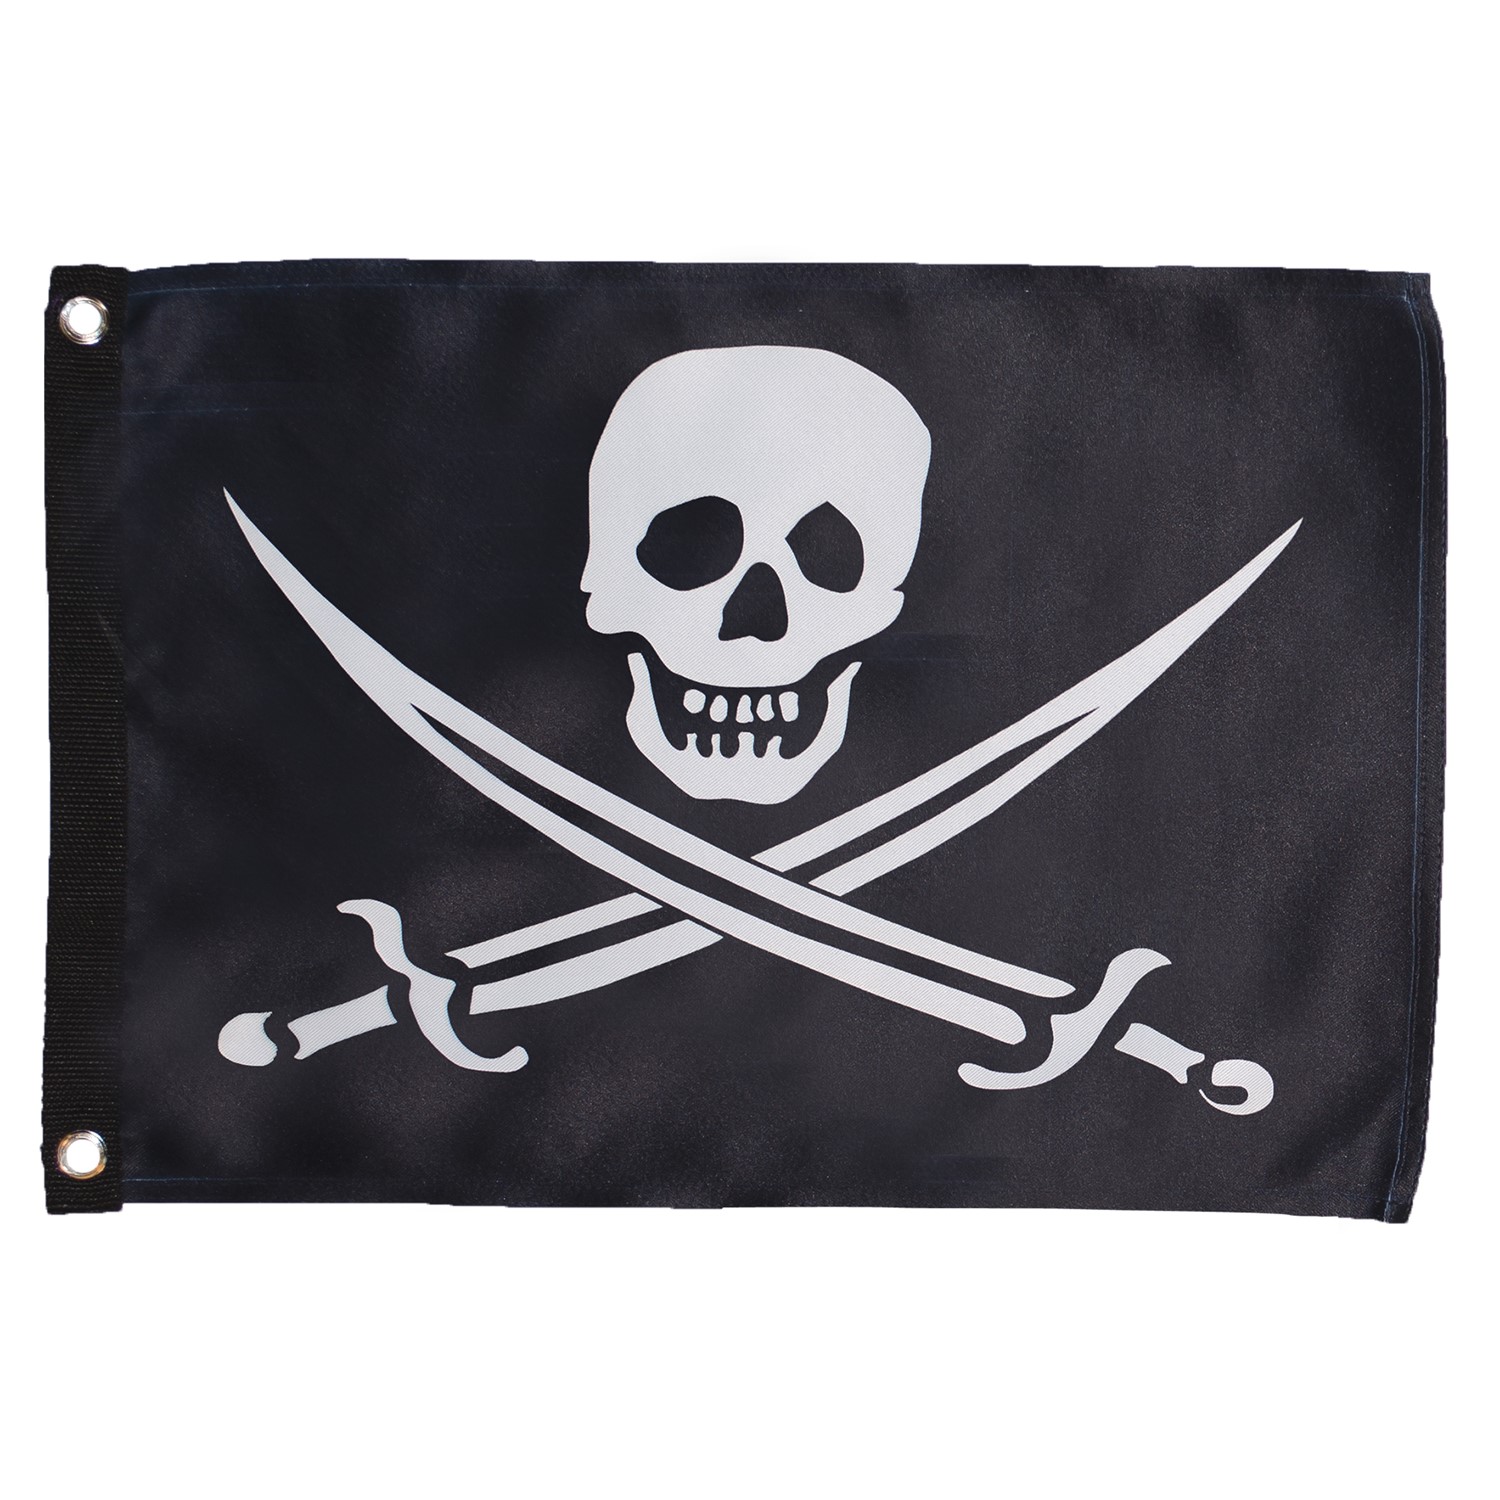 In the Breeze Calico Jack Lustre 12x18 Grommet Flag 3684